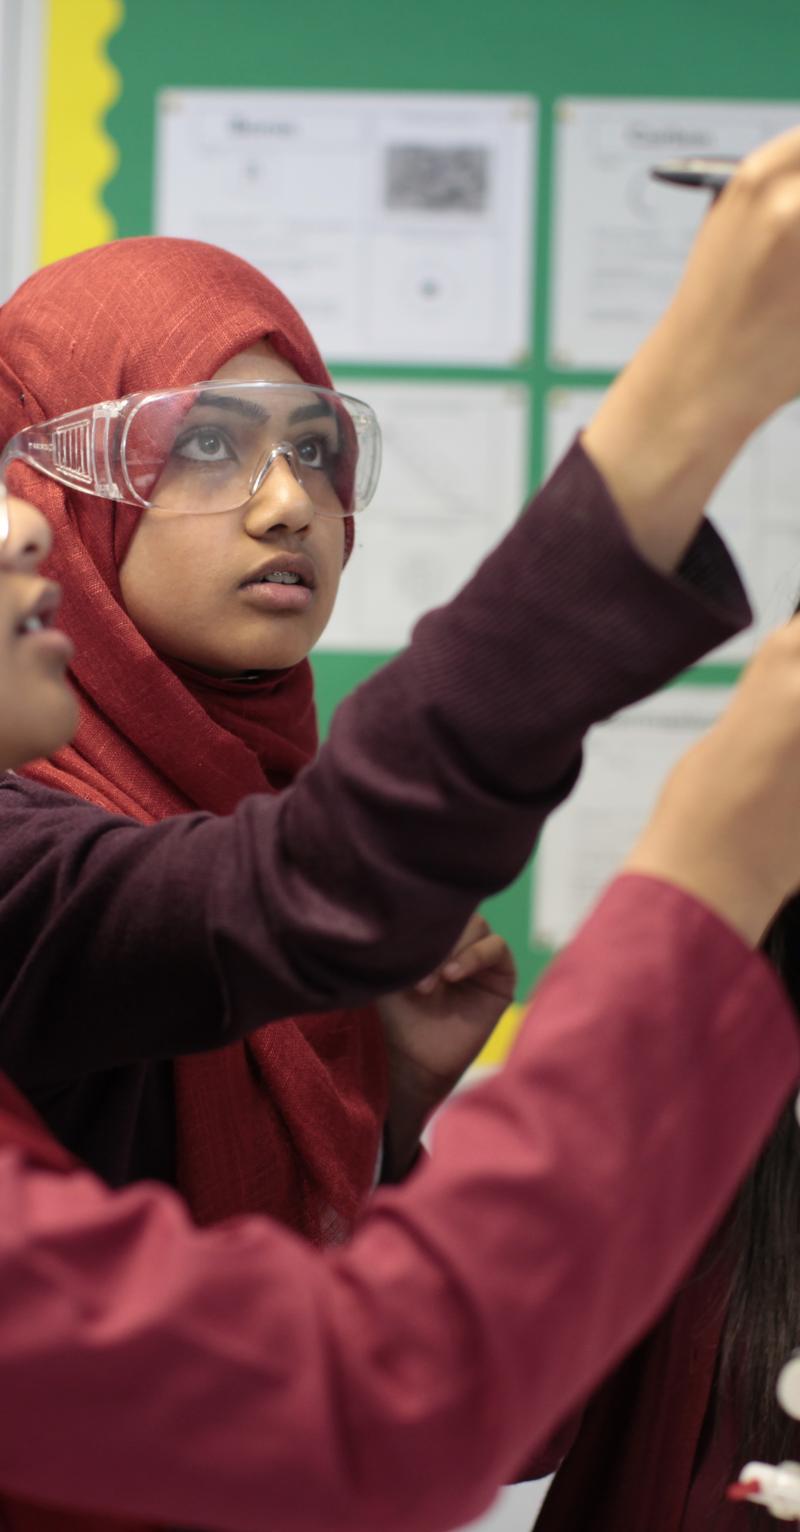 Three adolescent girls wearing all red uniforms are conducting a science experiment in a classroom with bulletin boards behind them. All of them are wearing clear, chemical safety goggles, and two of them are wearing hijabs. They are looking intently upward as they measure a liquid in a graduated cylinder.